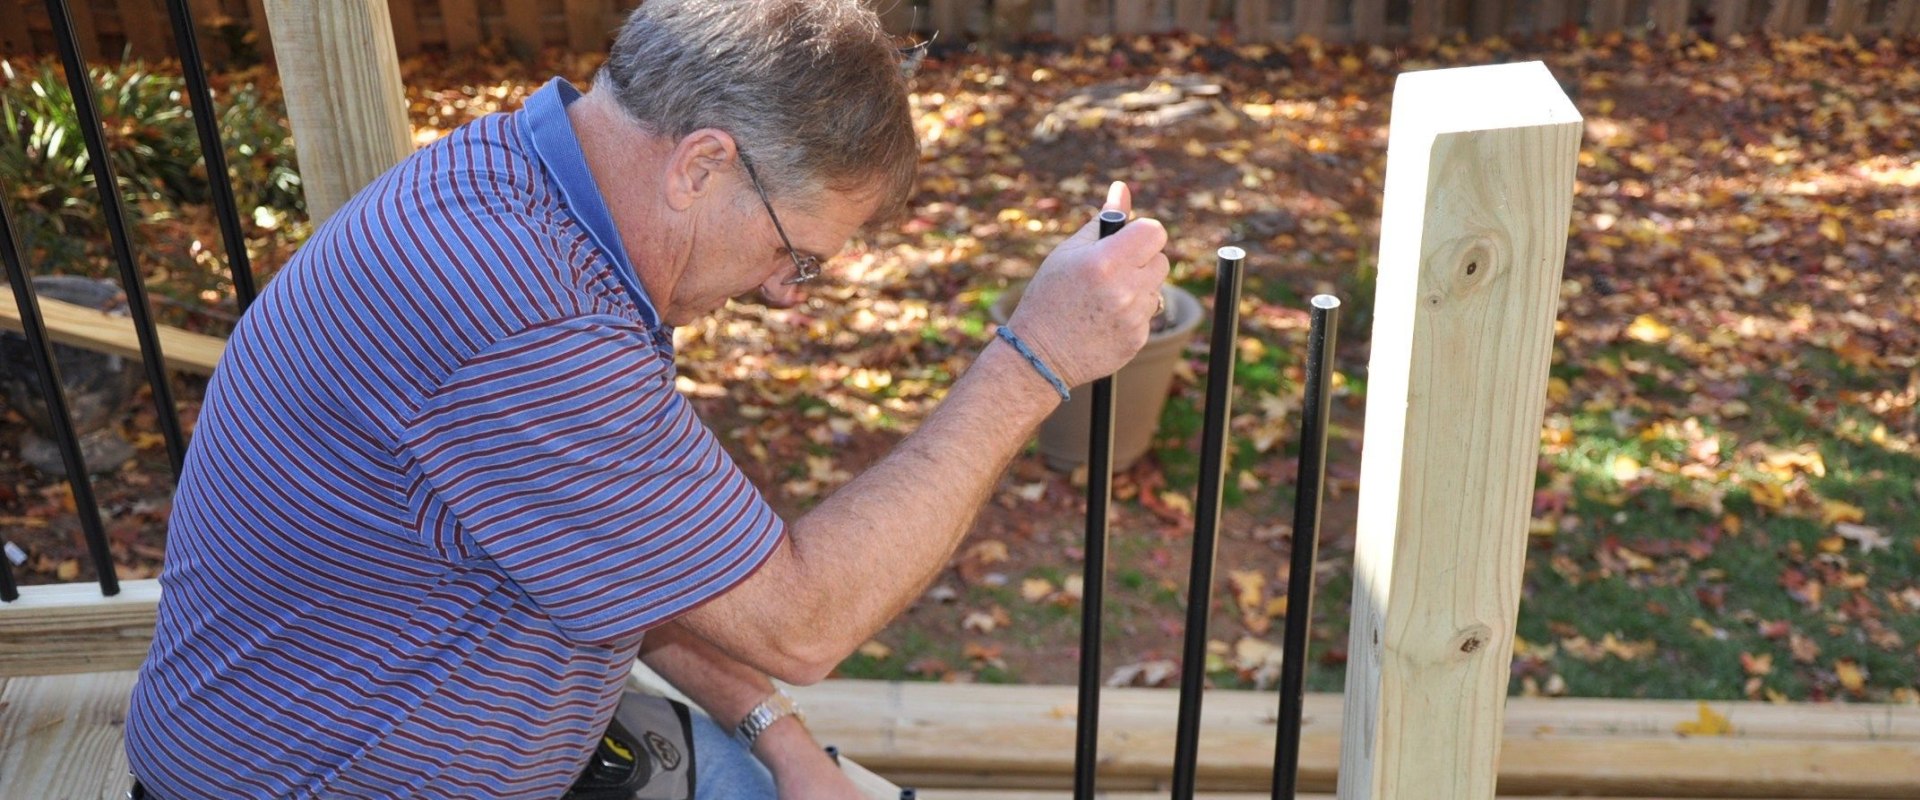 Attaching Rails and Pickets: A Step-By-Step Guide